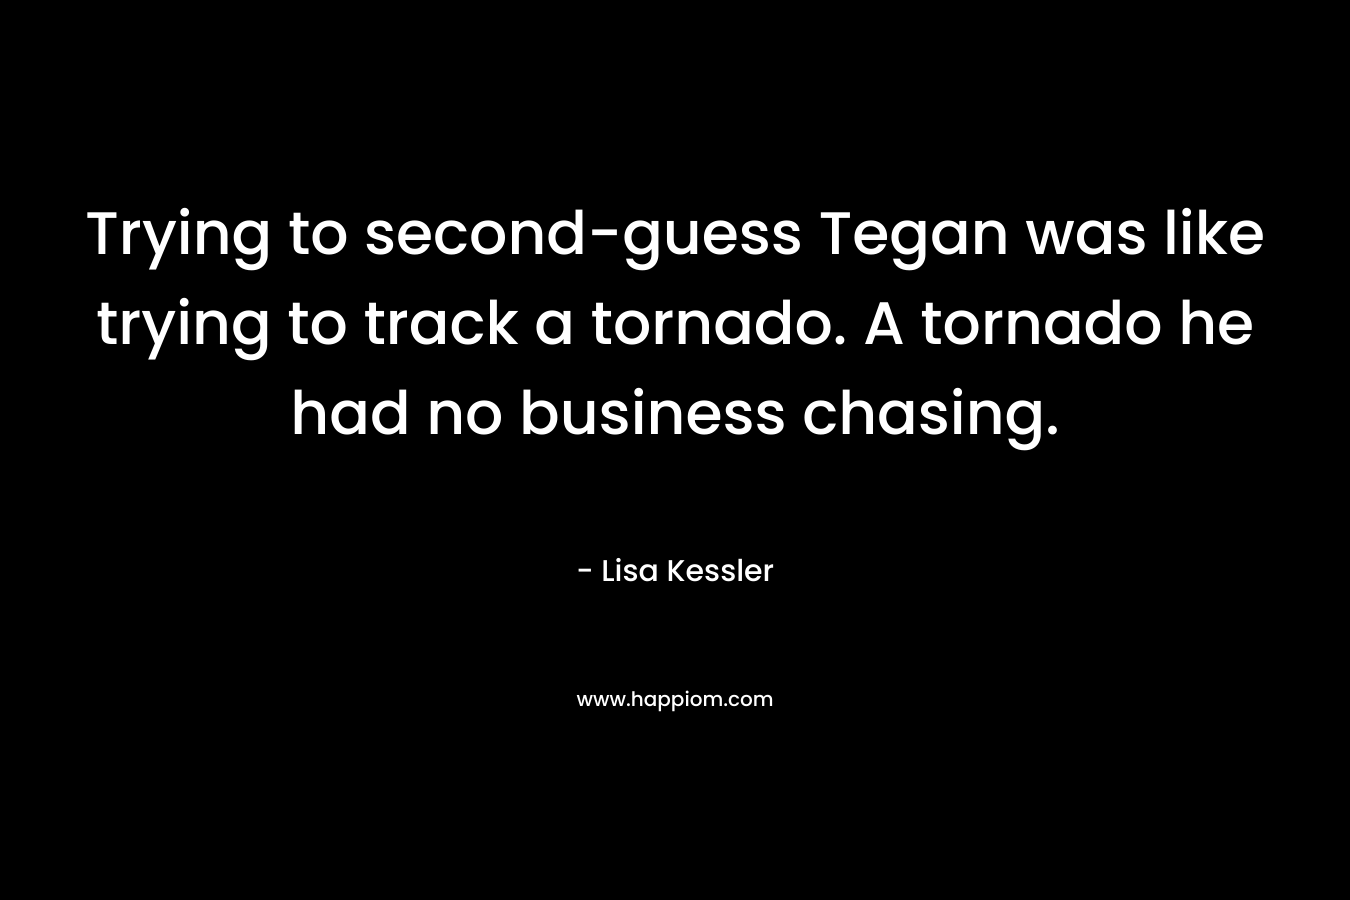 Trying to second-guess Tegan was like trying to track a tornado. A tornado he had no business chasing.